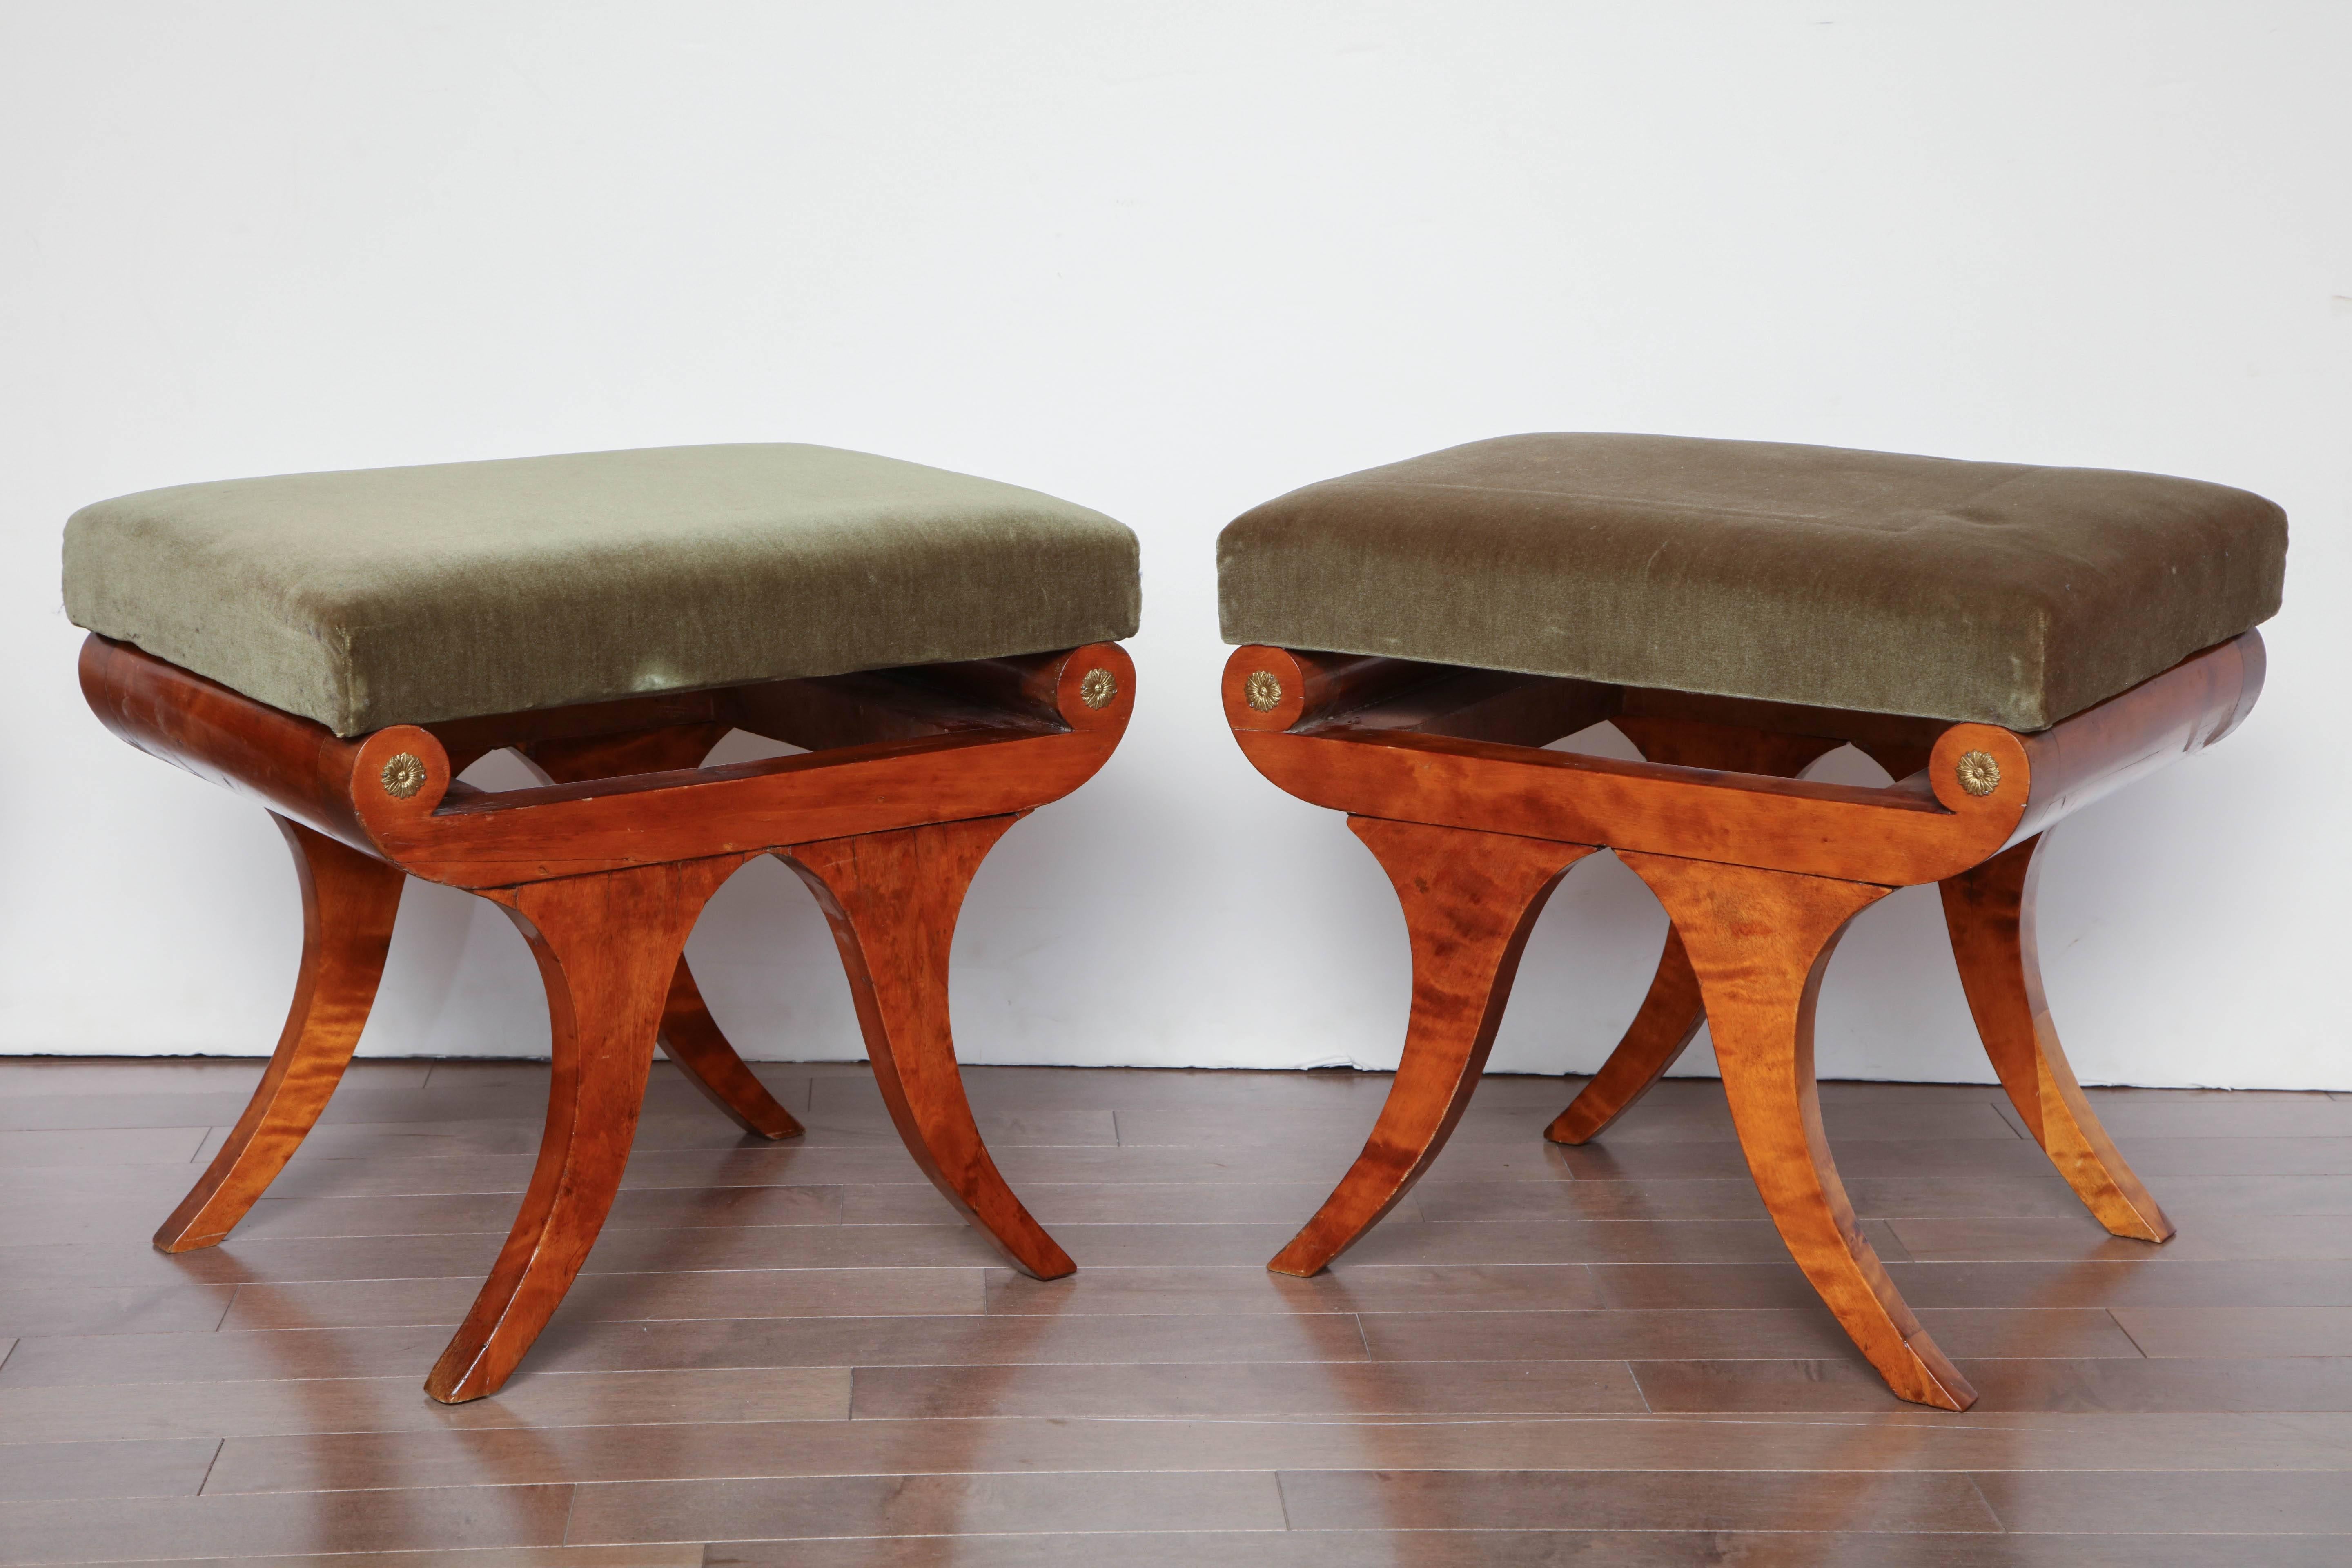 Neoclassical A Pair of 19th Century Swedish Birch Stools